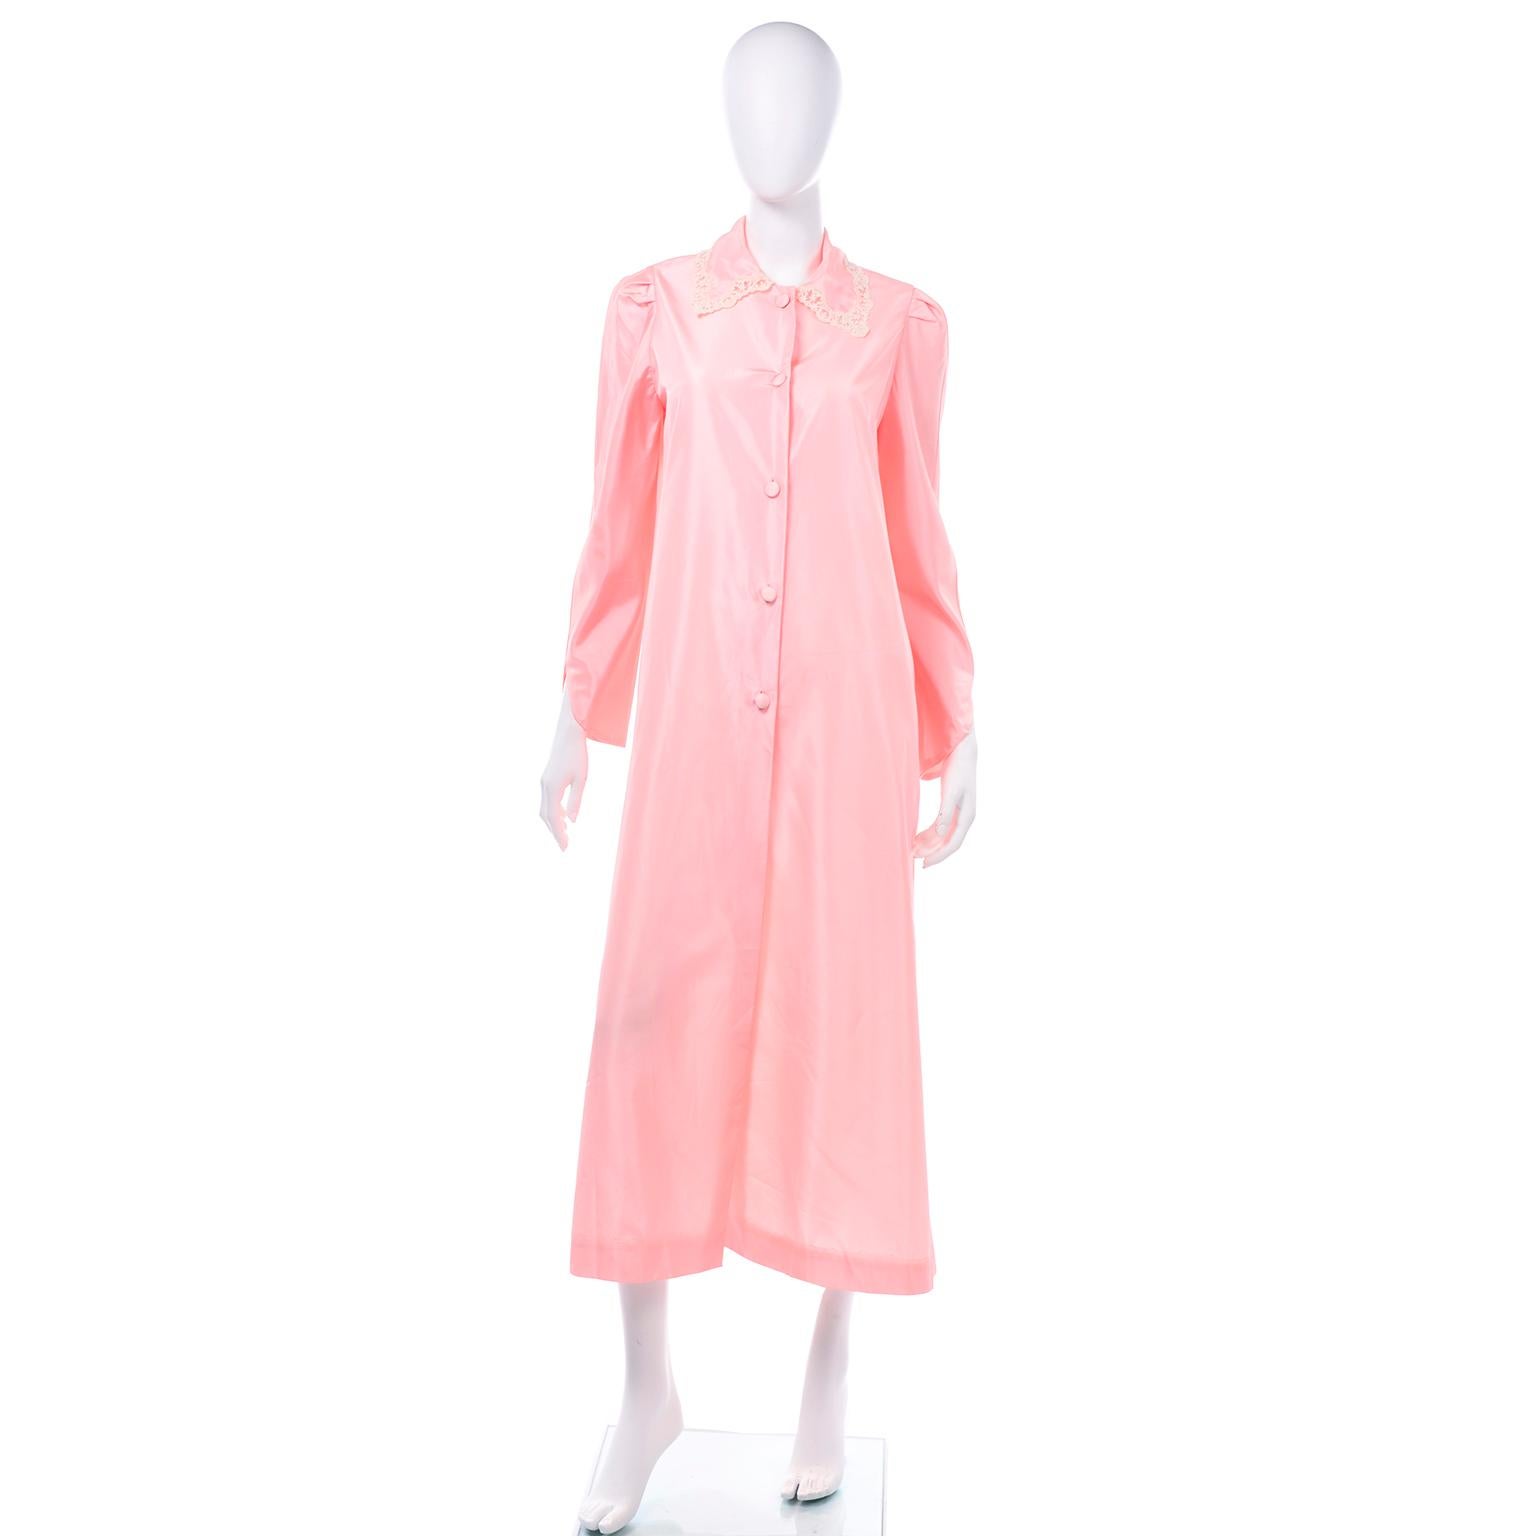 This is a really lovely vintage robe from Chloé in a pretty pink taffeta with lace trim. The sleeves are cut at an angle at the cuff and delicate cream lace trim is around the pointed collar. Ths housecoat is quite long and has fabric covered